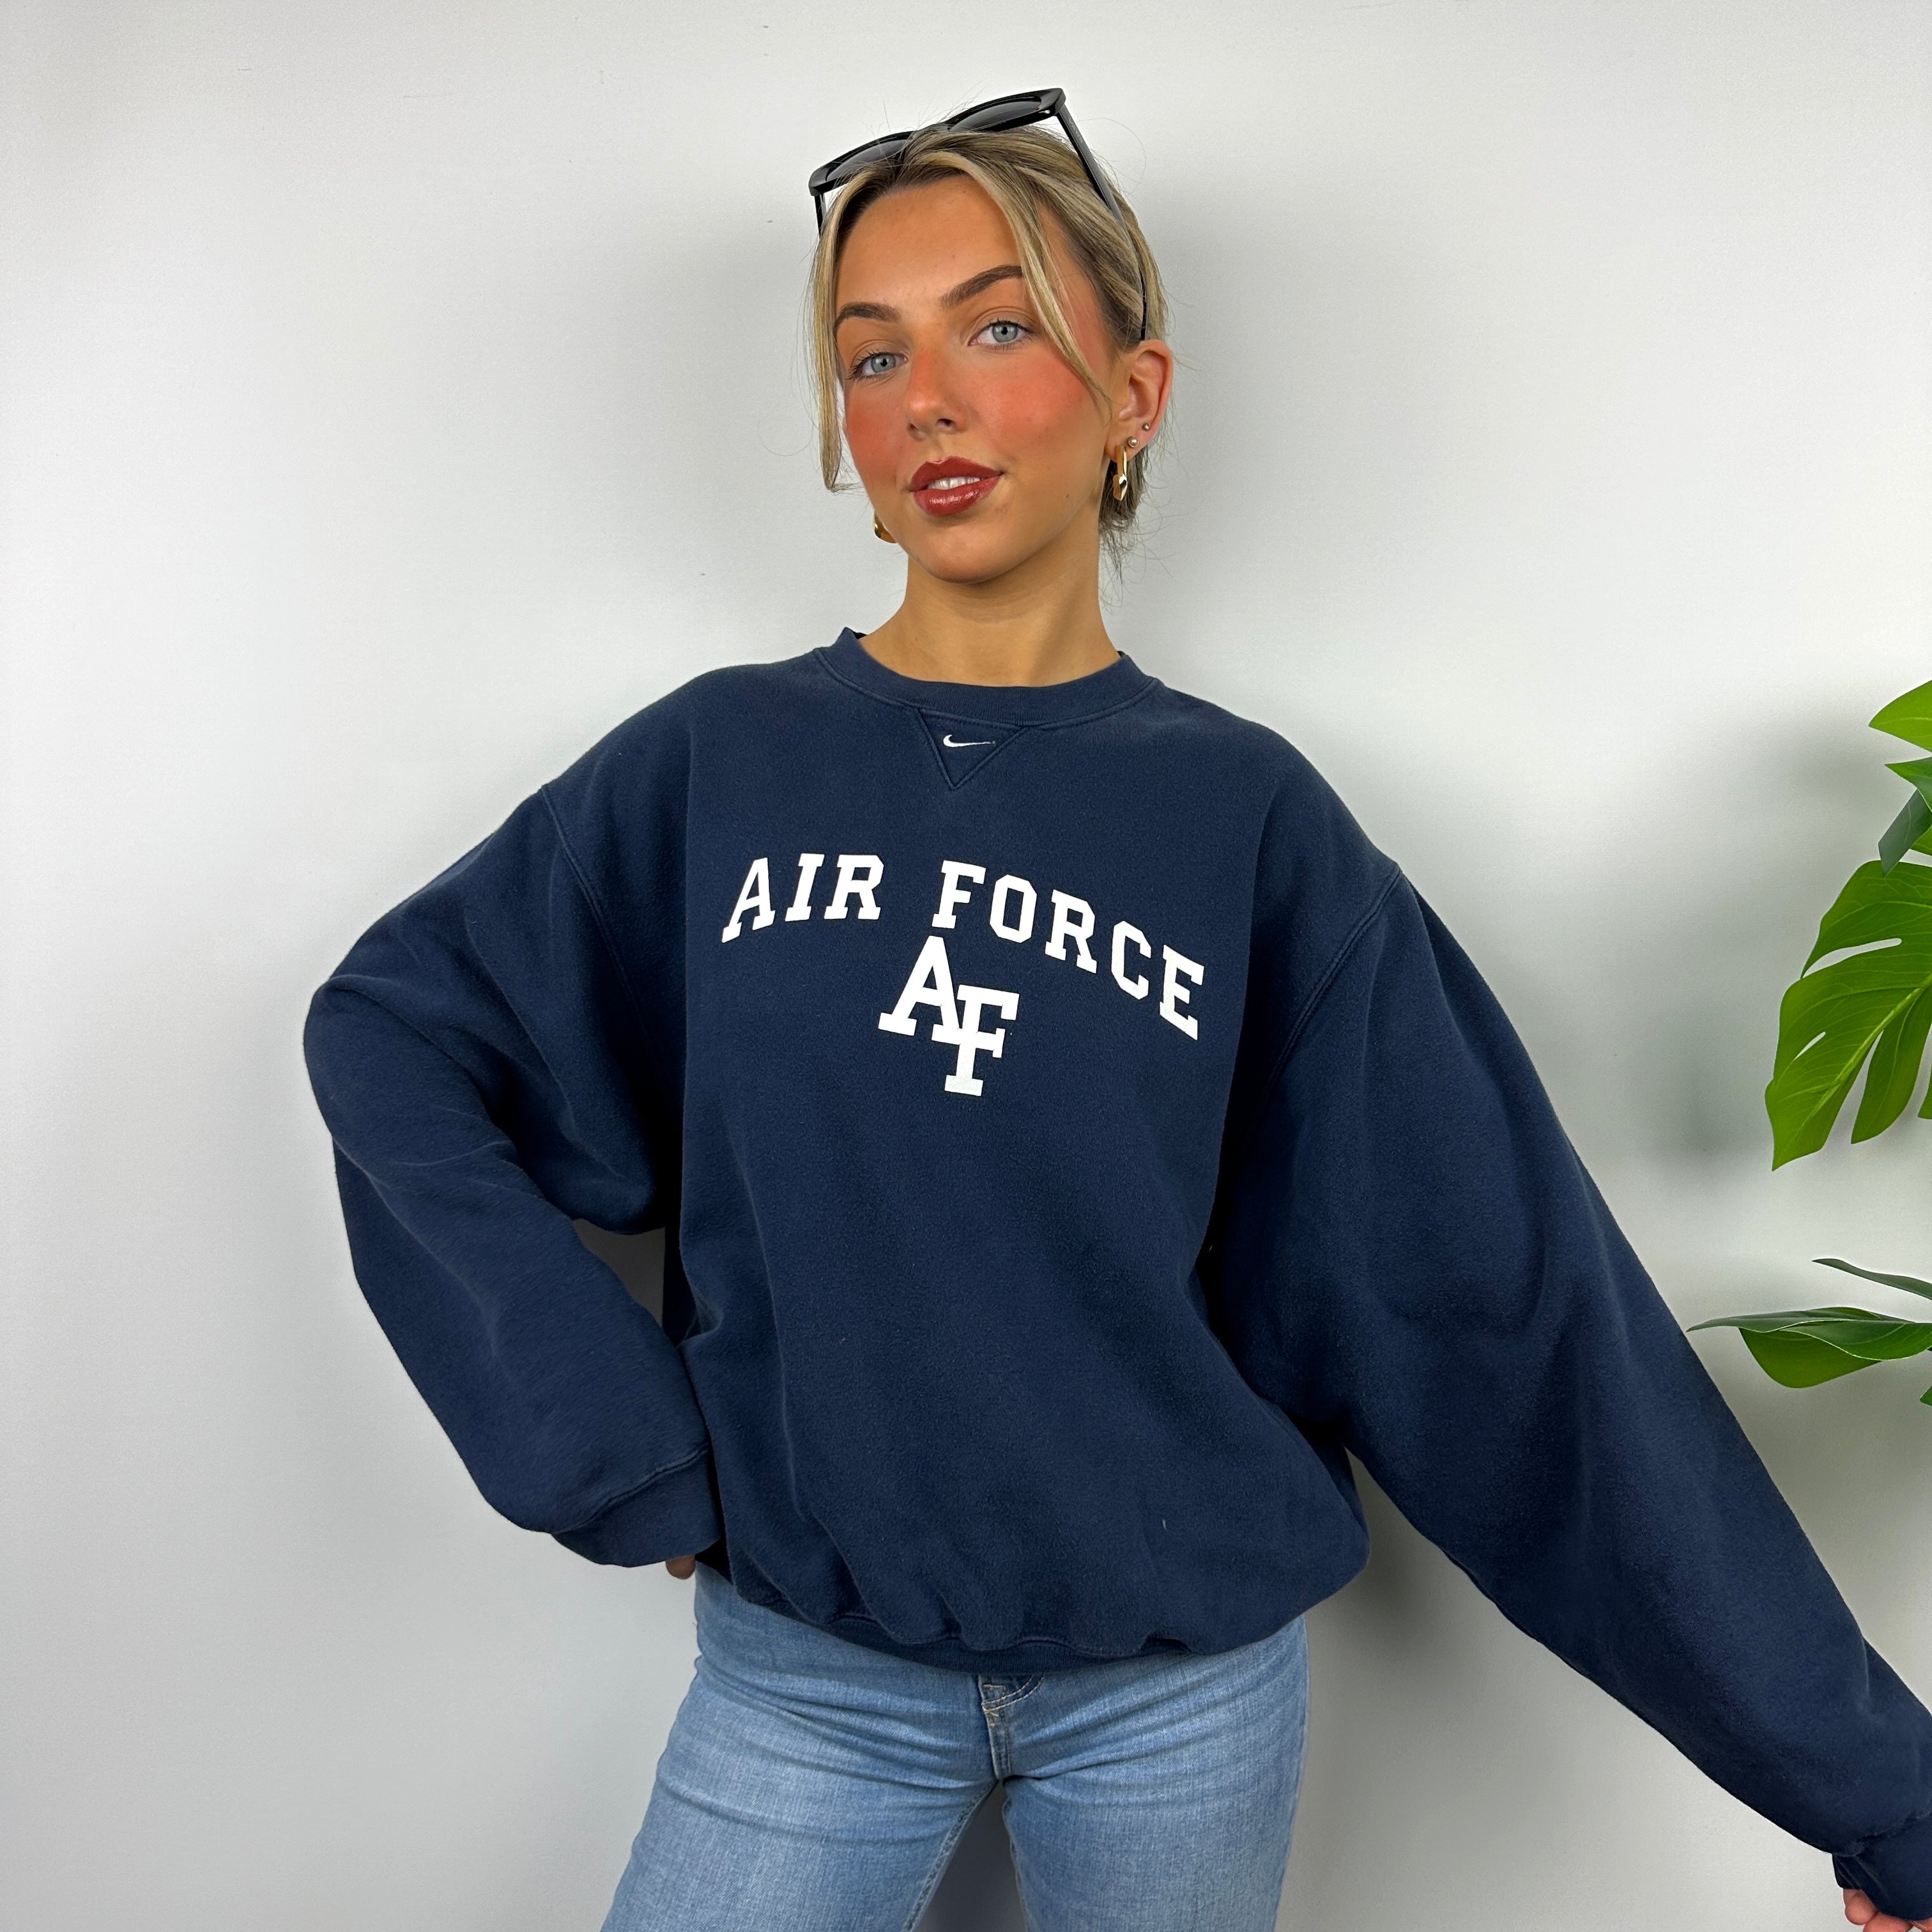 Nike x Air Force Navy Spell Out Sweatshirt (S)